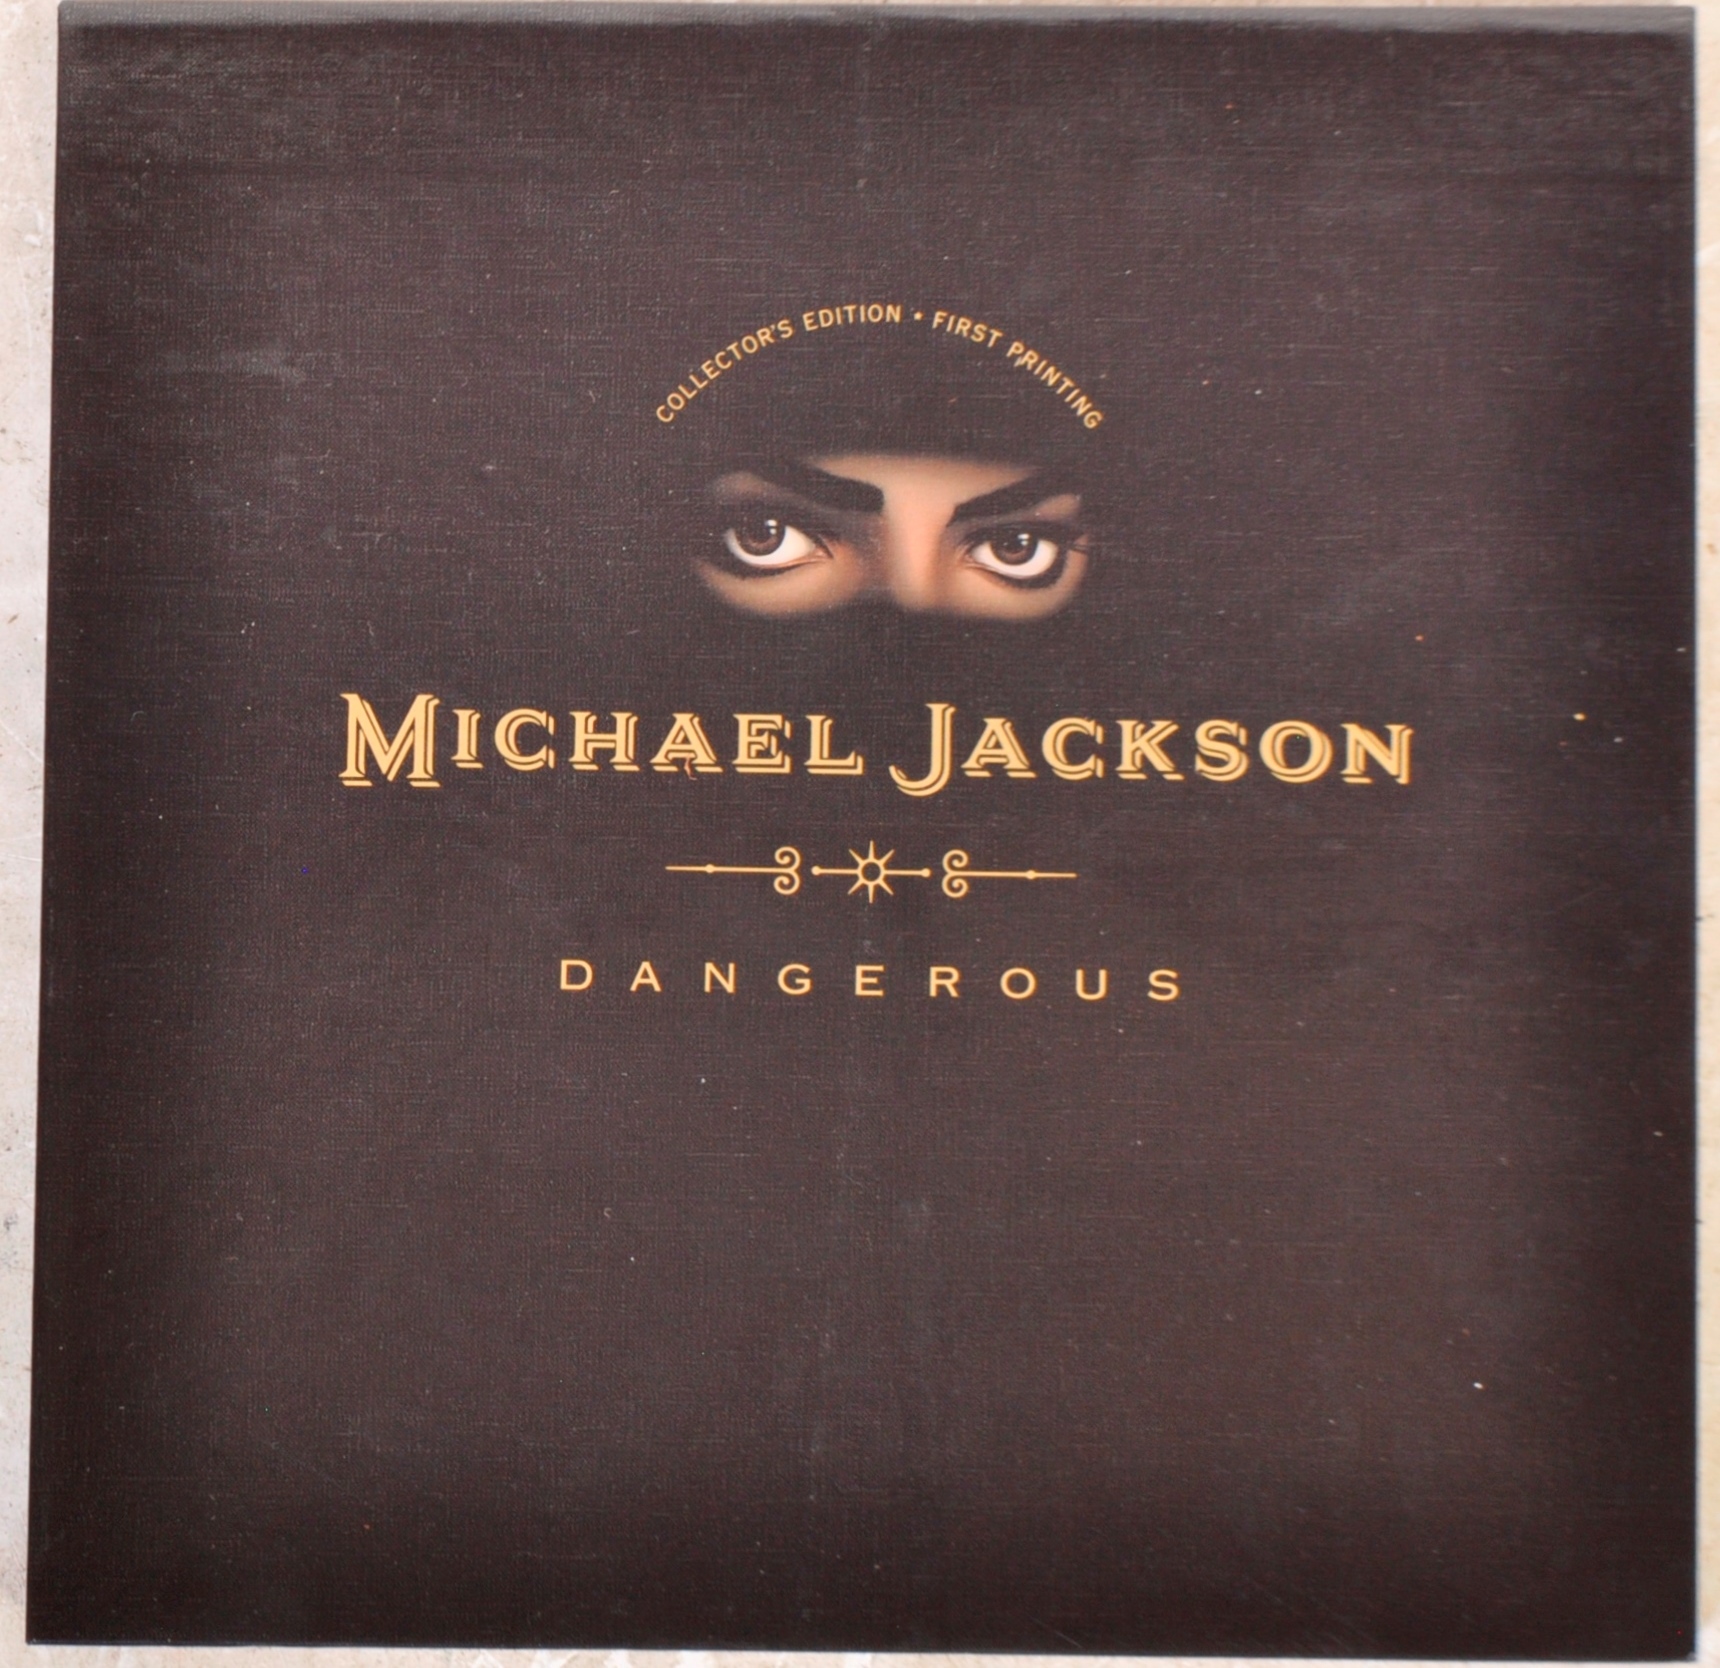 MICHEAL JACKSON - DANGEROUS - COLLECTOR'S EDITION CD